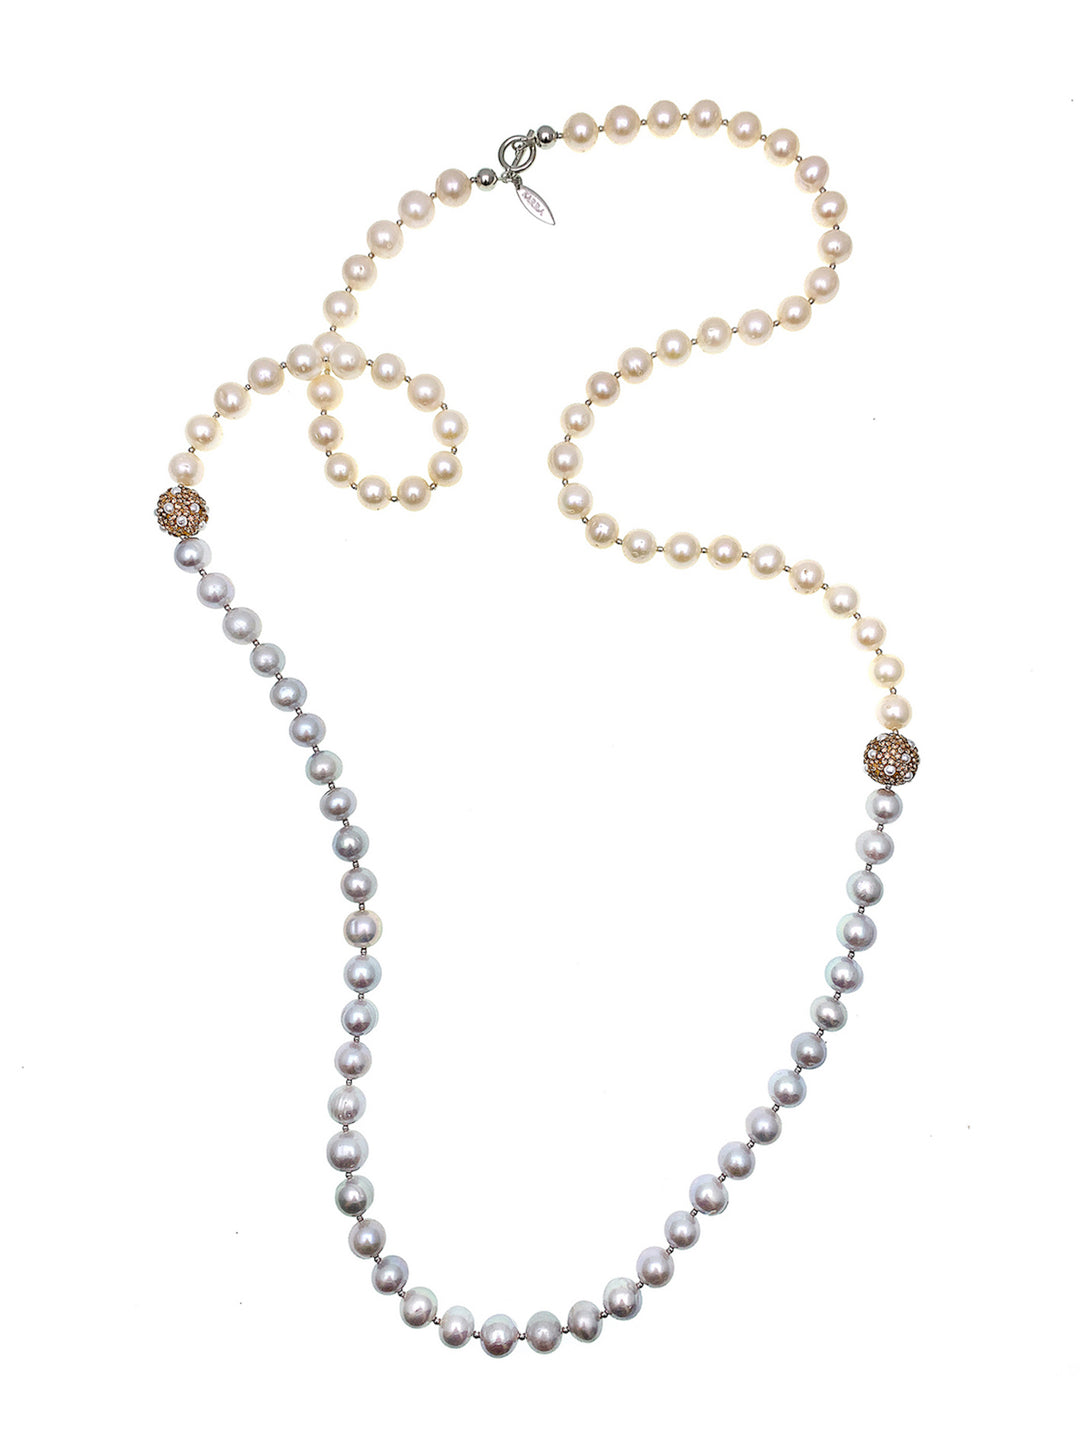 Gray & White Freshwater Pearls Long Necklace FN024 - FARRA